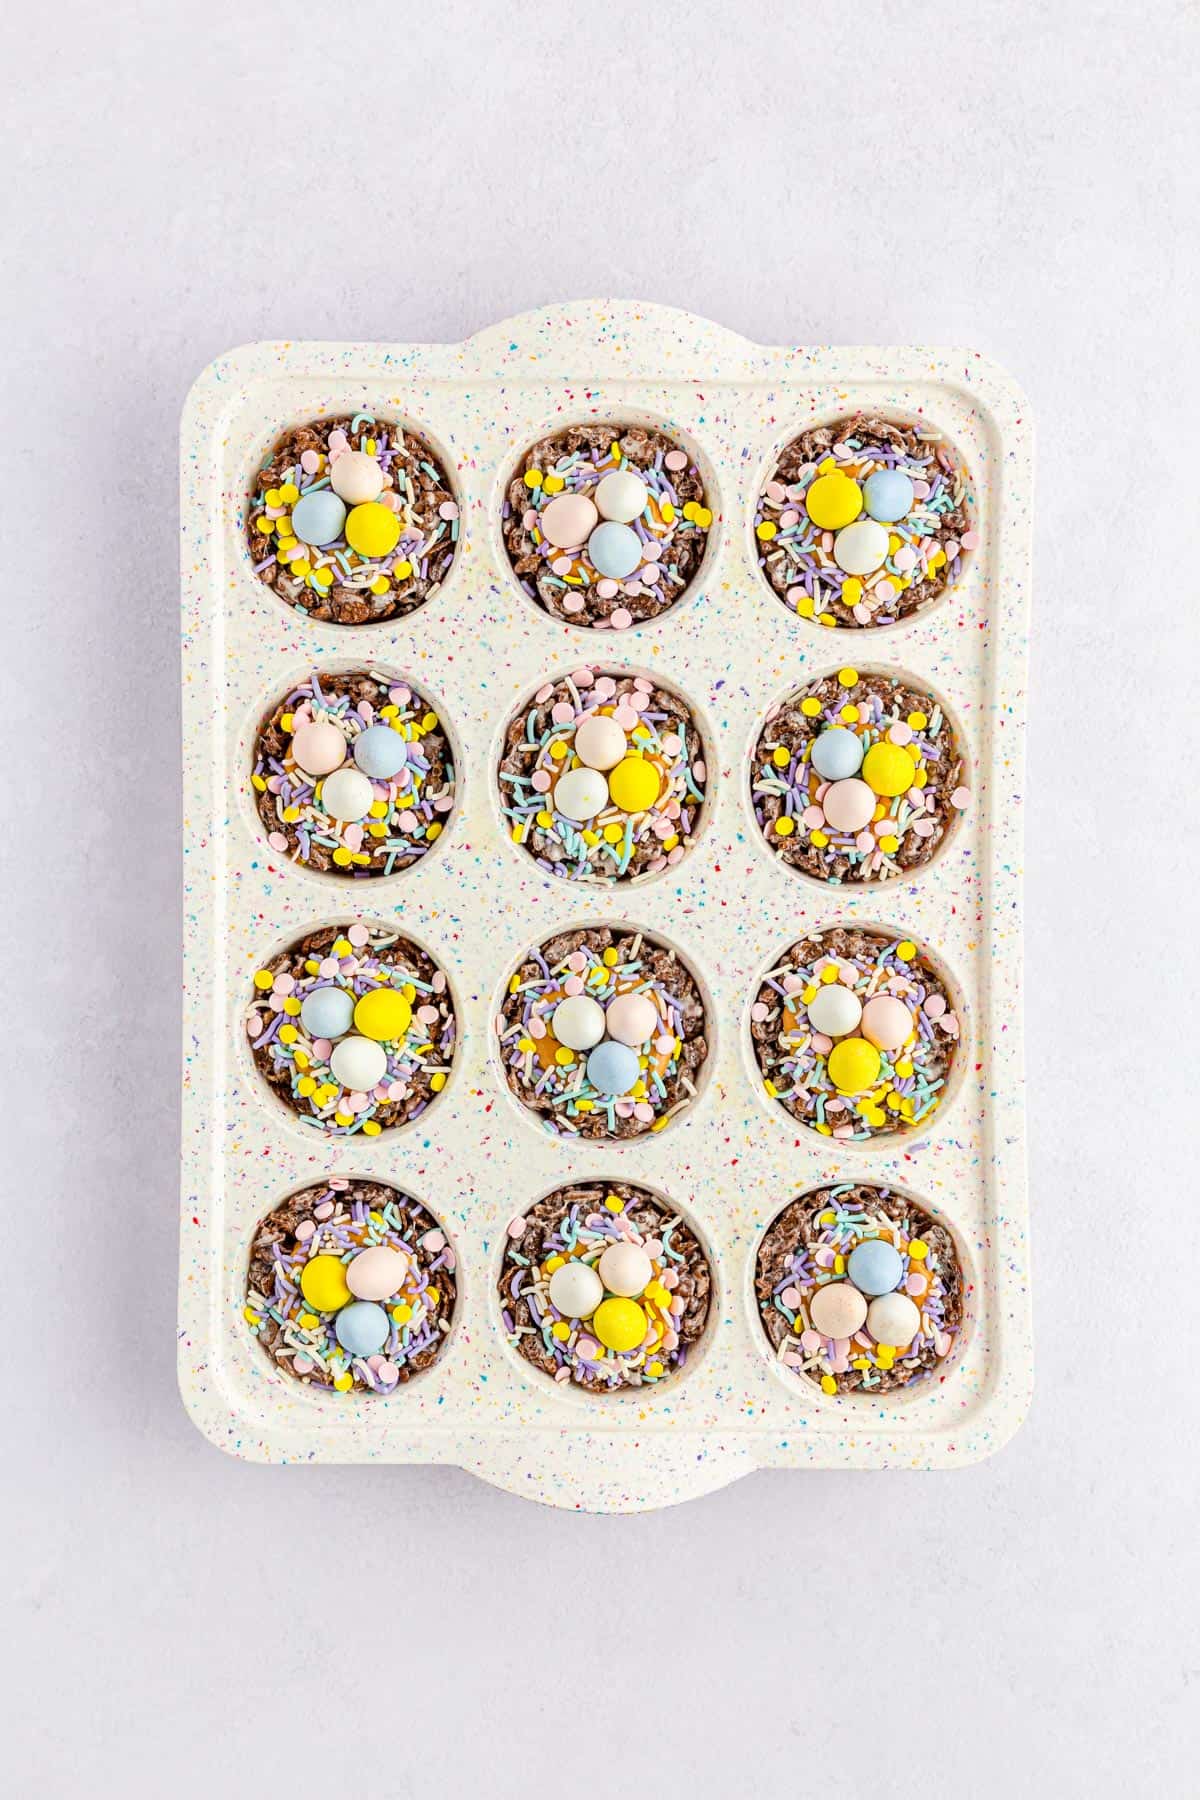 Chocolate nests topped with sprinkles and Cadbury mini eggs in a muffin pan.